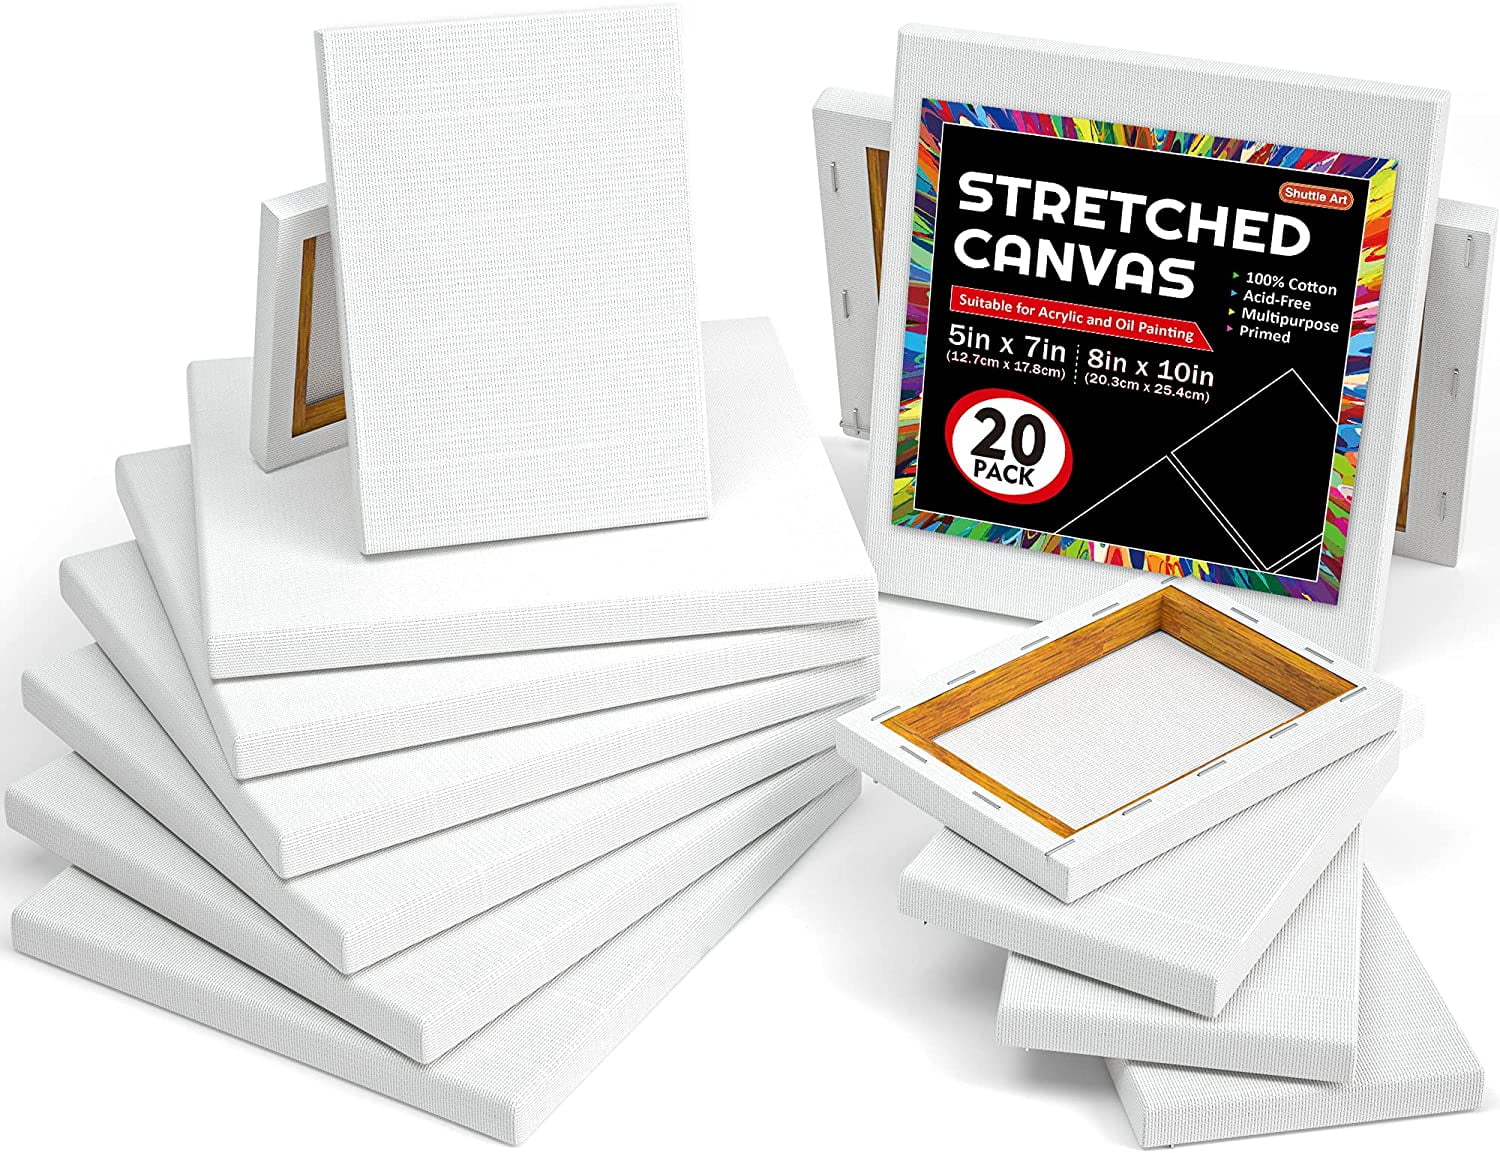 8 x 10 Inch Stretched Canvas Value Pack of 10 